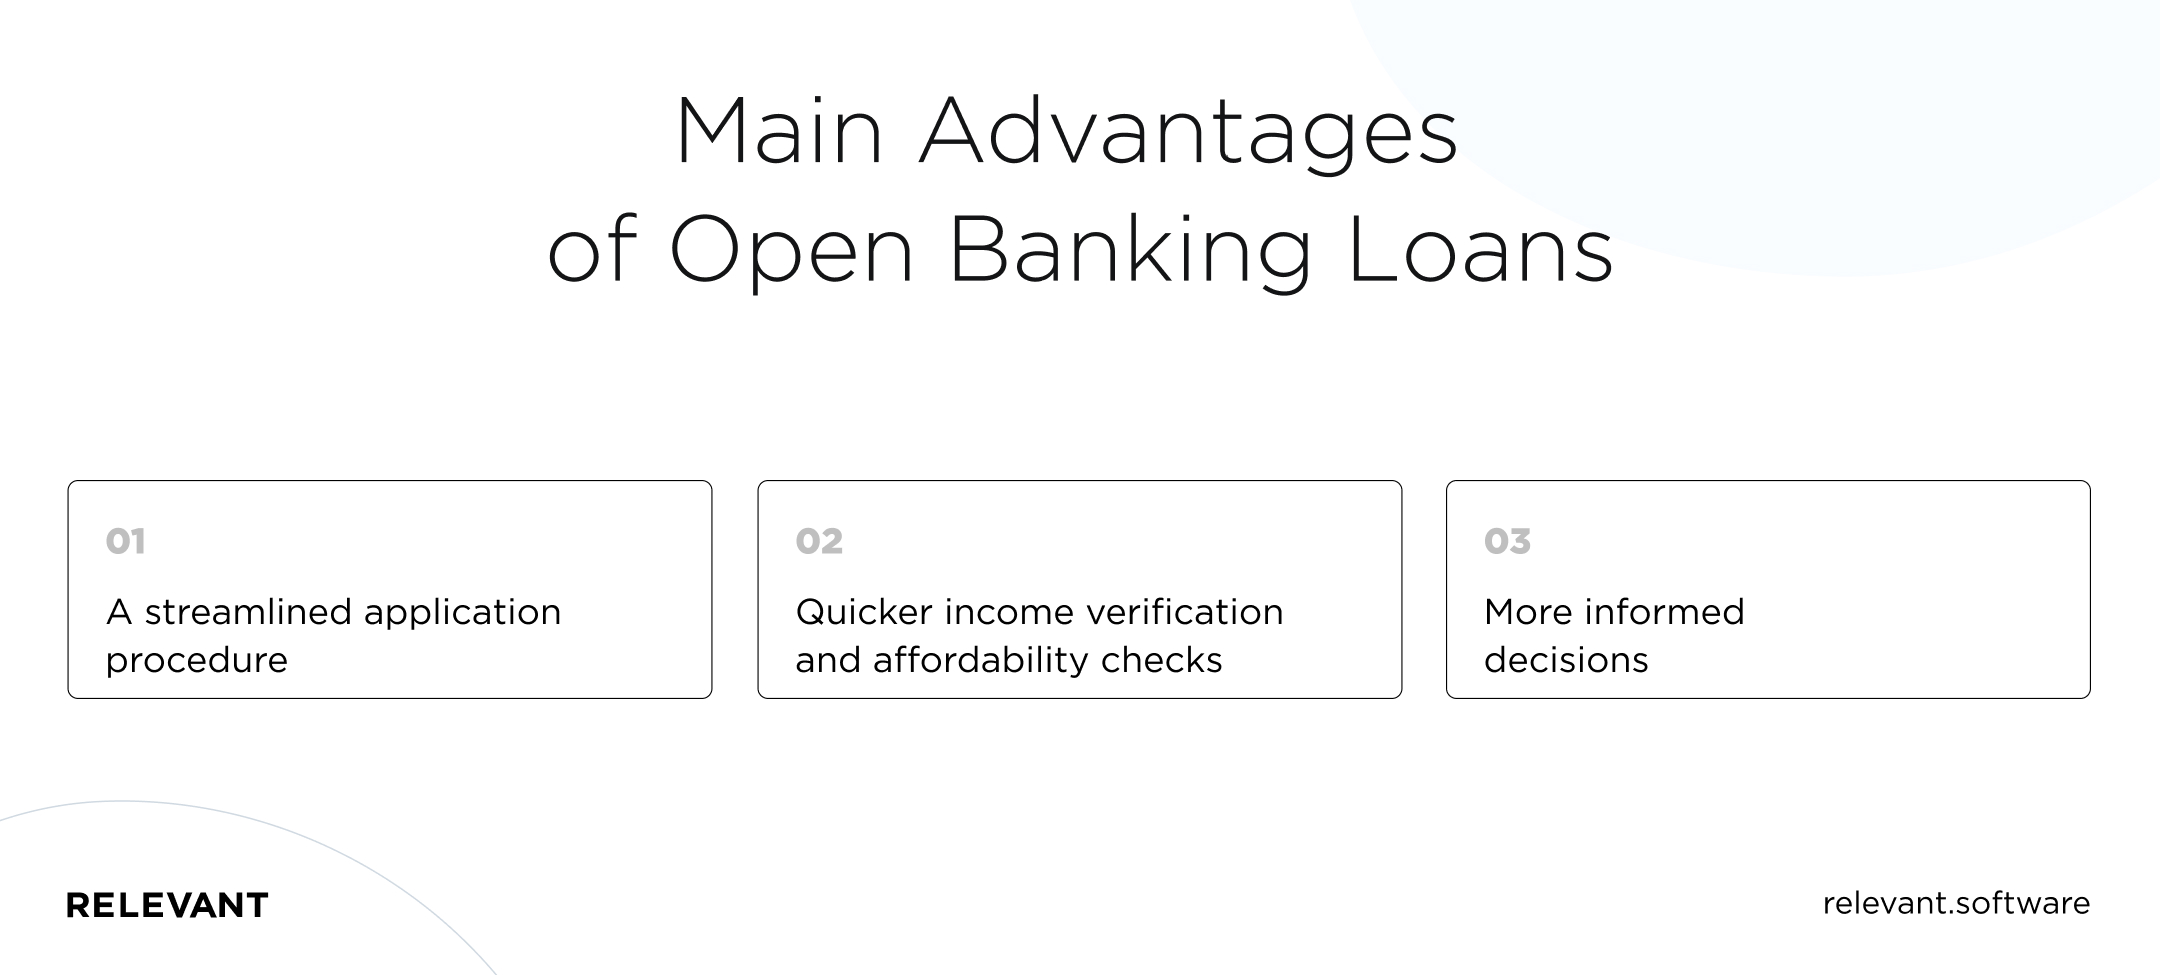 Main Advantages of Open Banking Loans